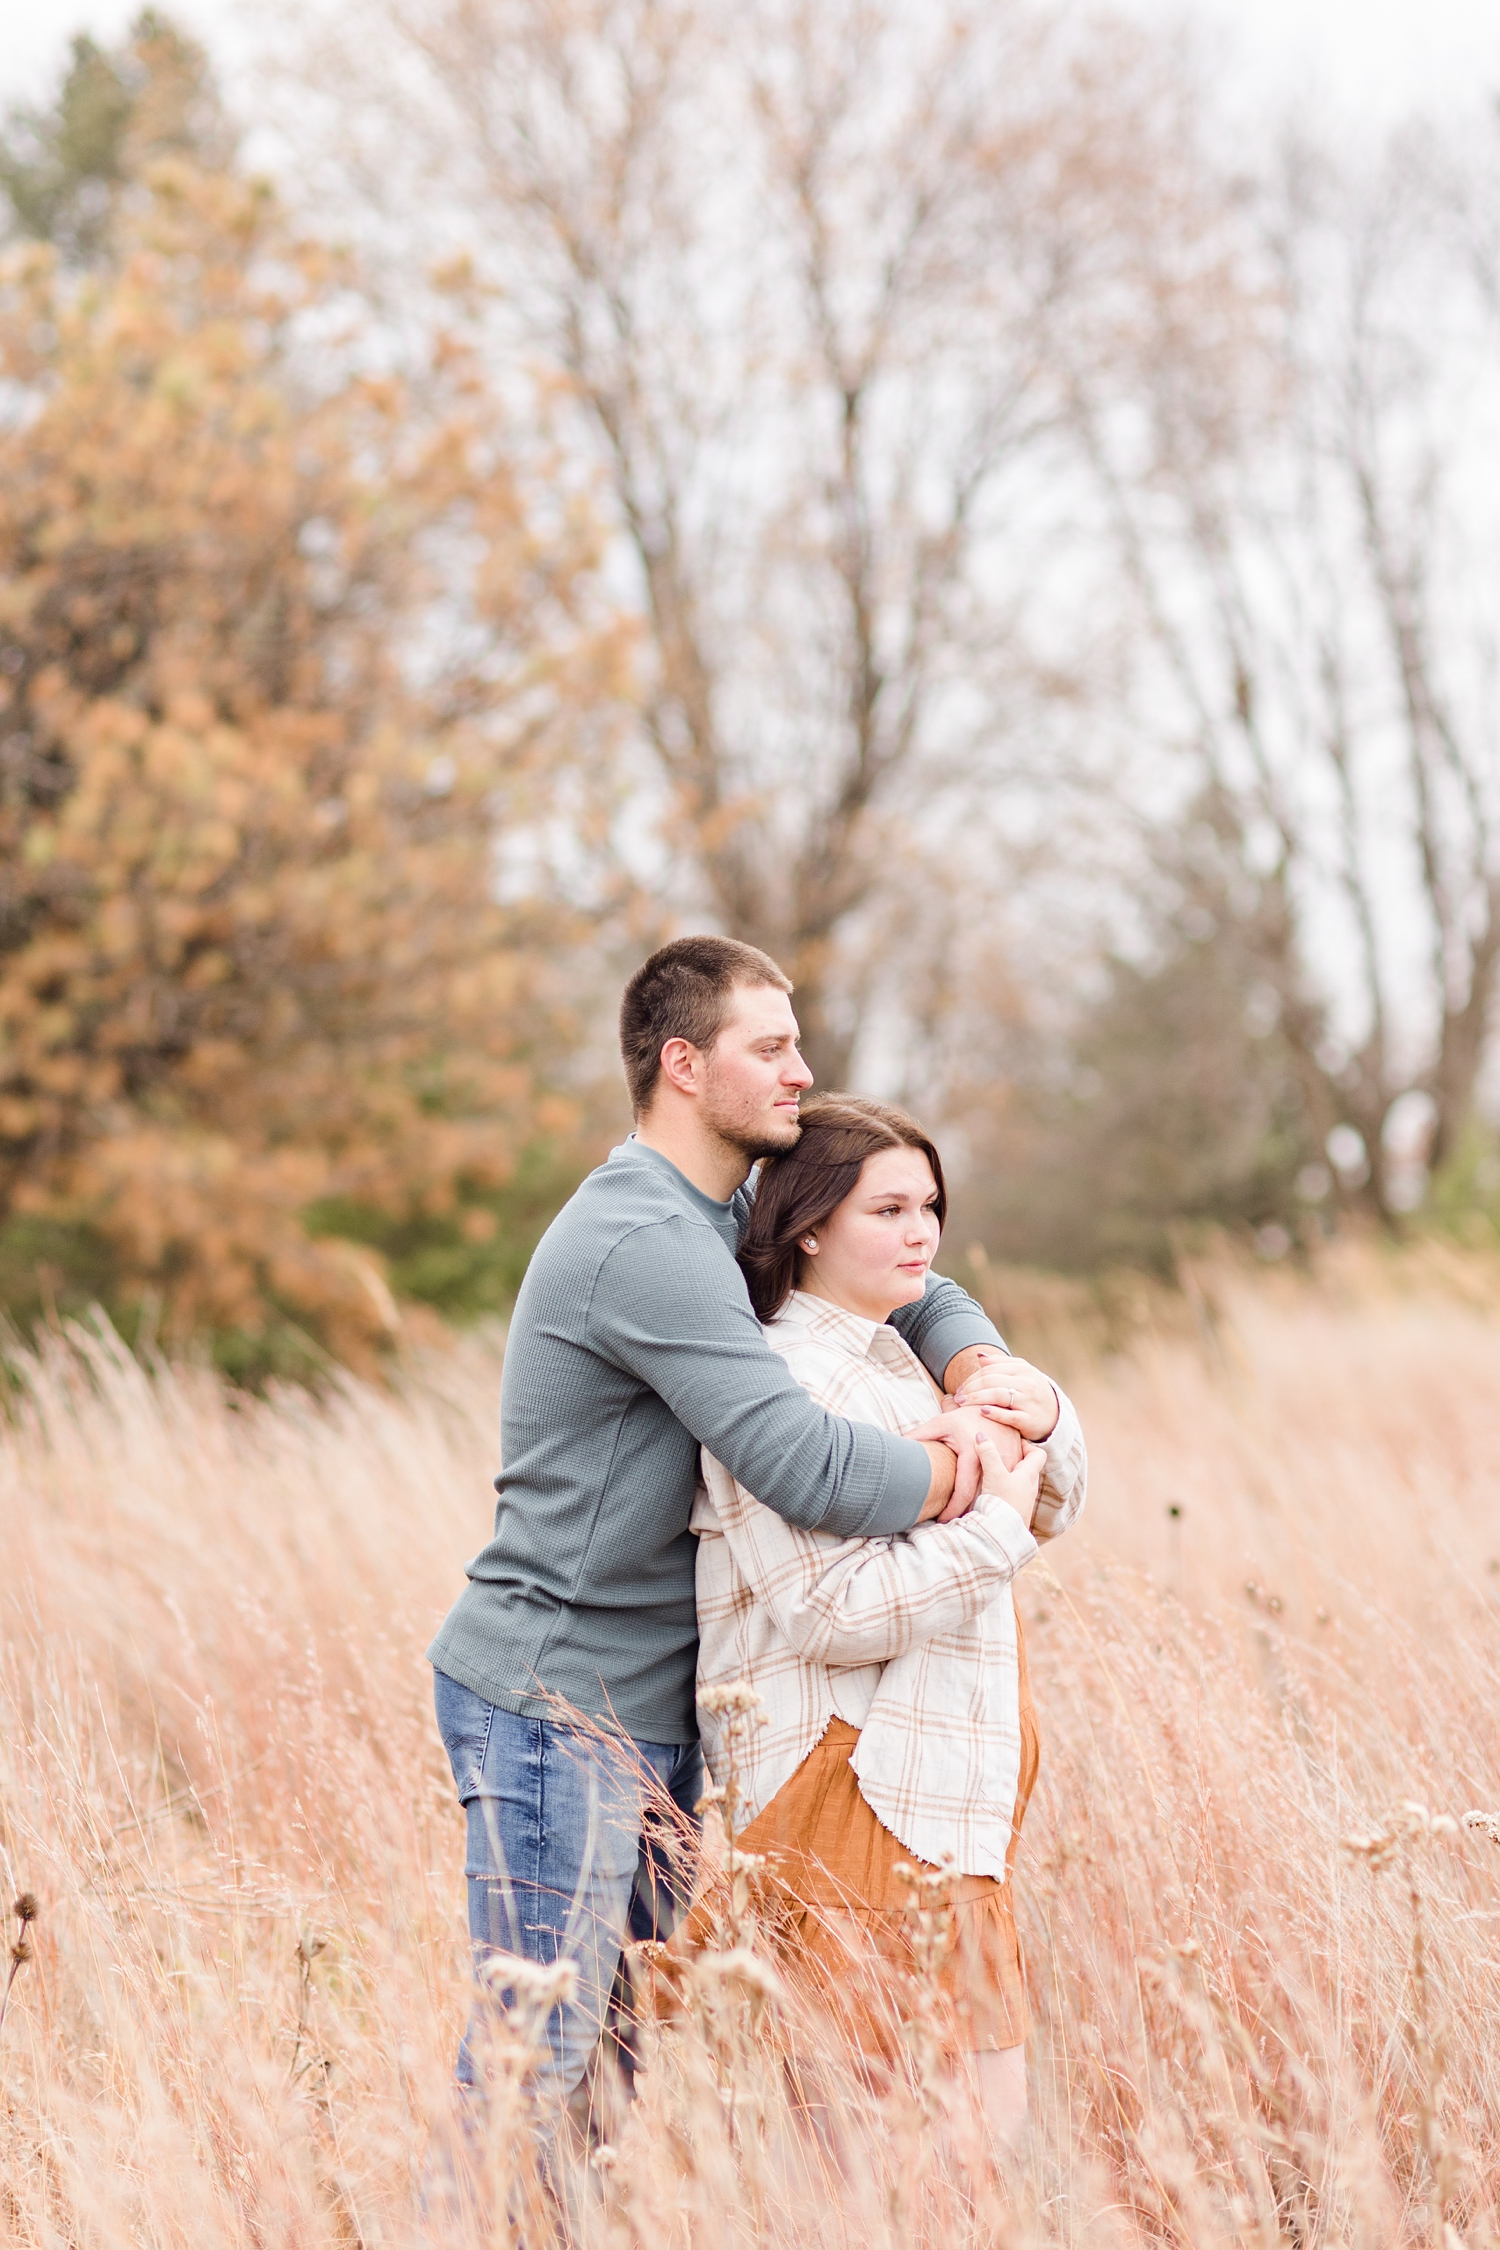 Austin embraces Mary from behind while standing in tall fall grass during their engagement photography session at Kennedy Park in Fort Dodge, IA | CB Studio